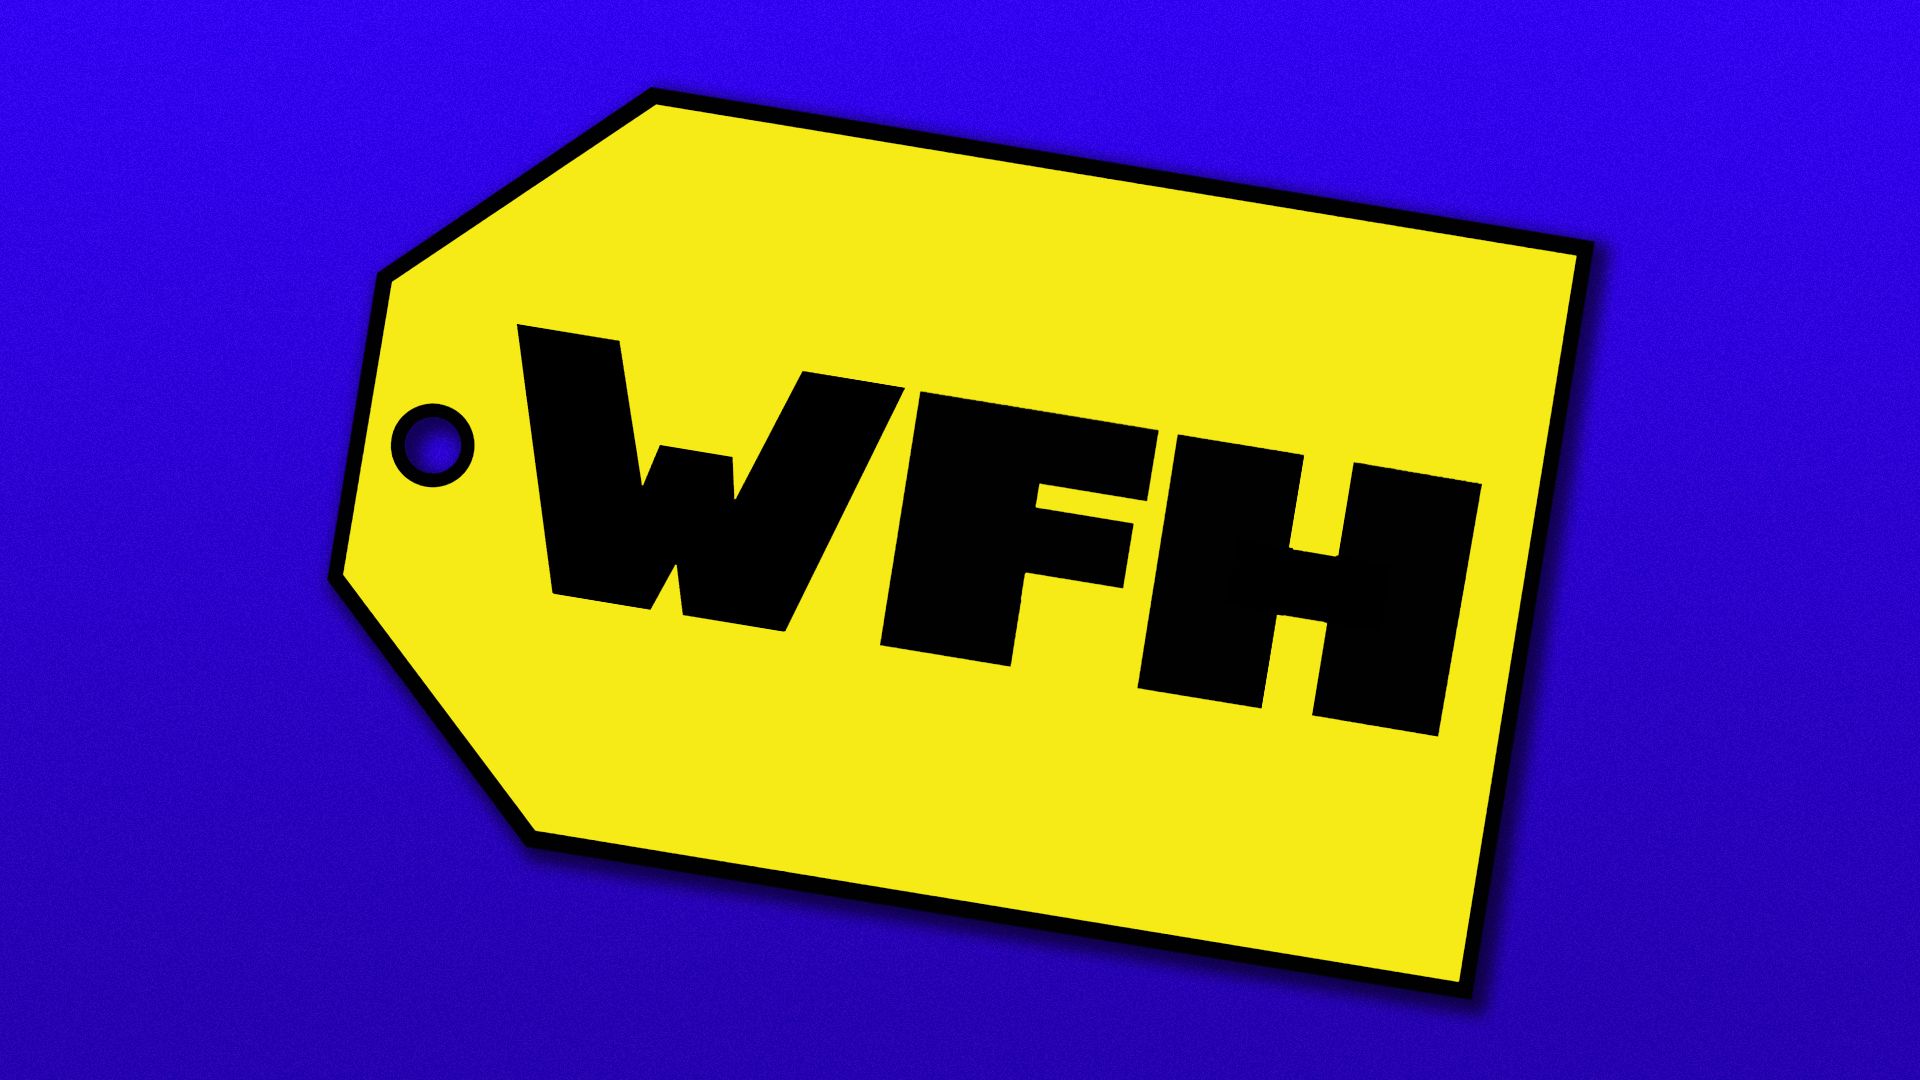 WFH abbreviation on a Best Buy logo-type tag